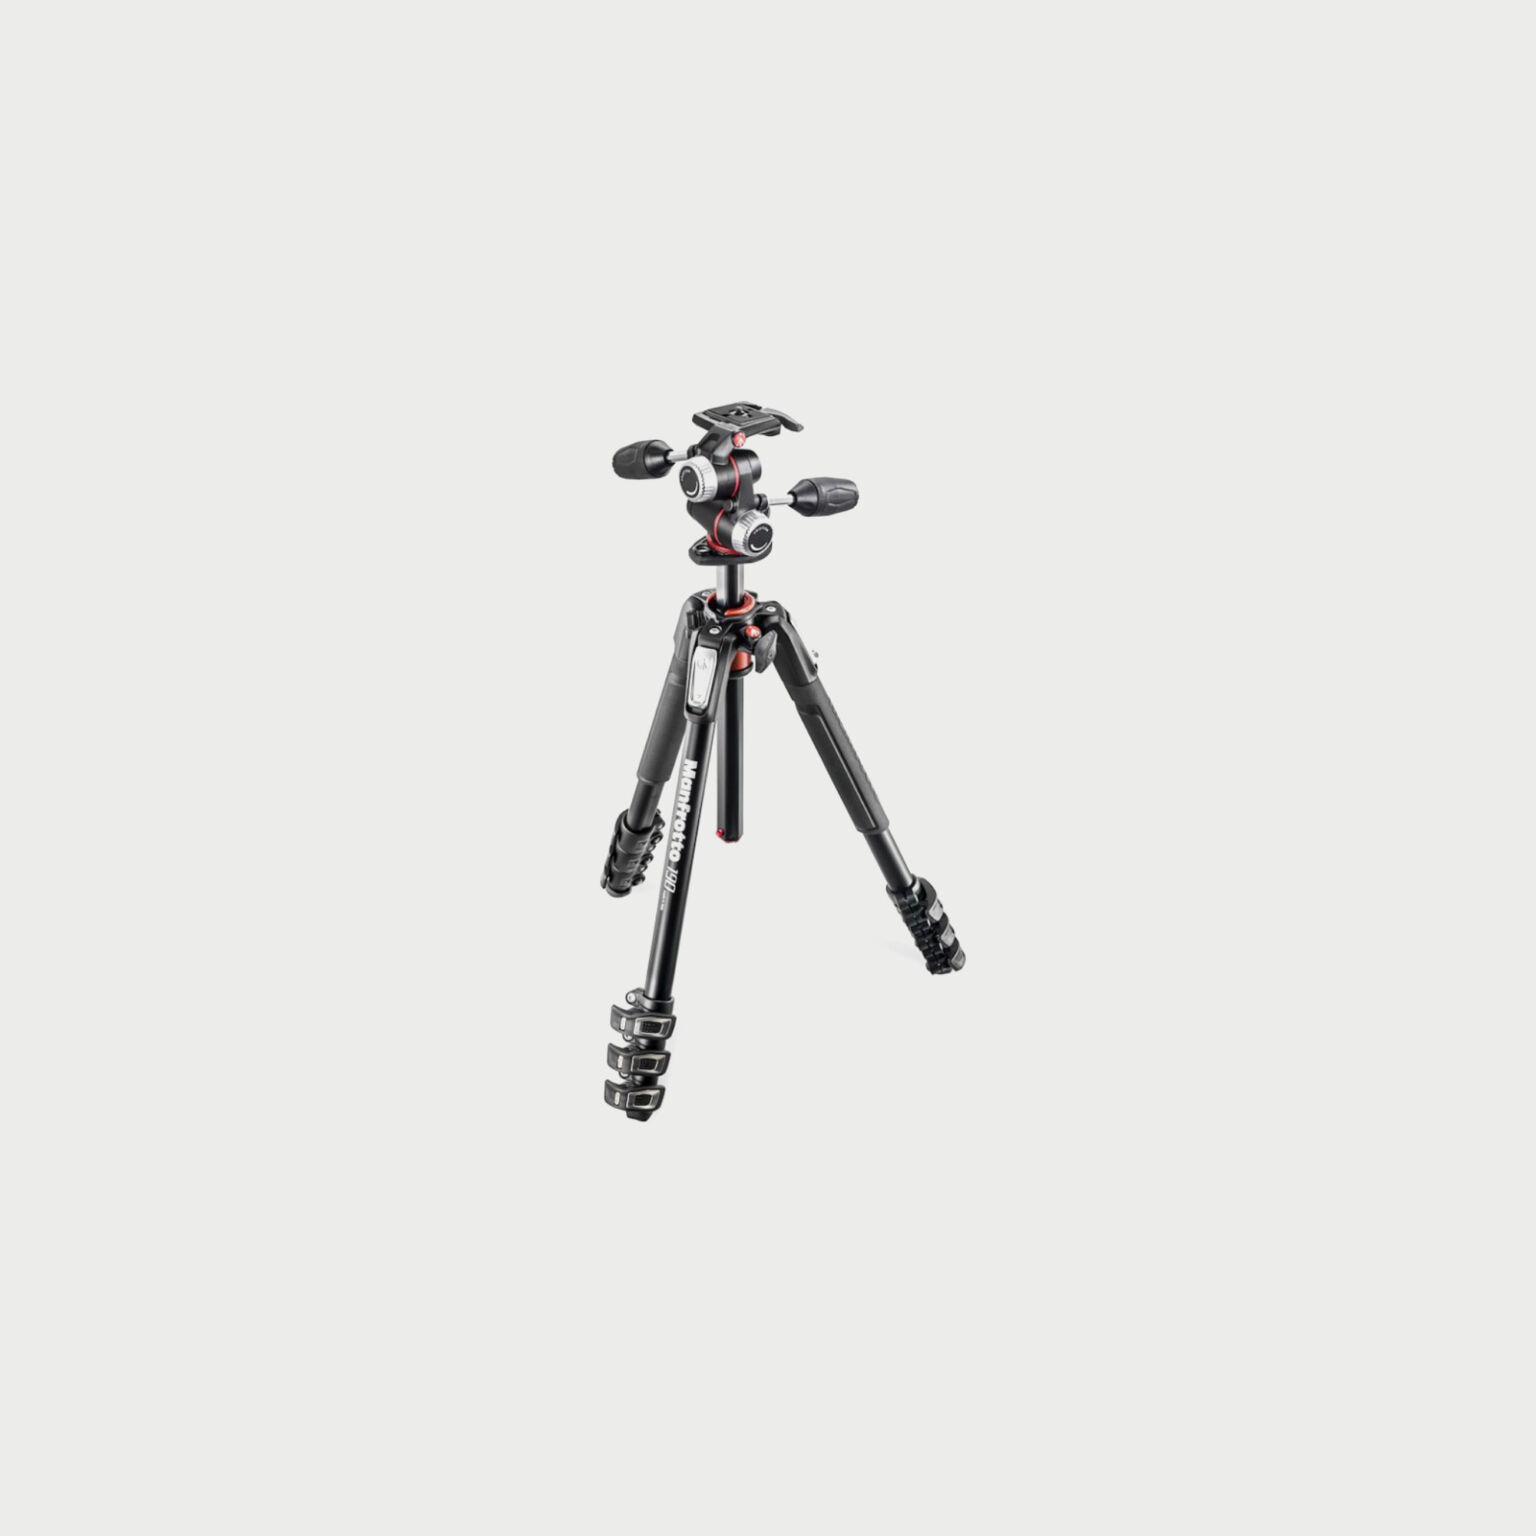 Manfrotto 190 Aluminium 4 Section Tripod With Head